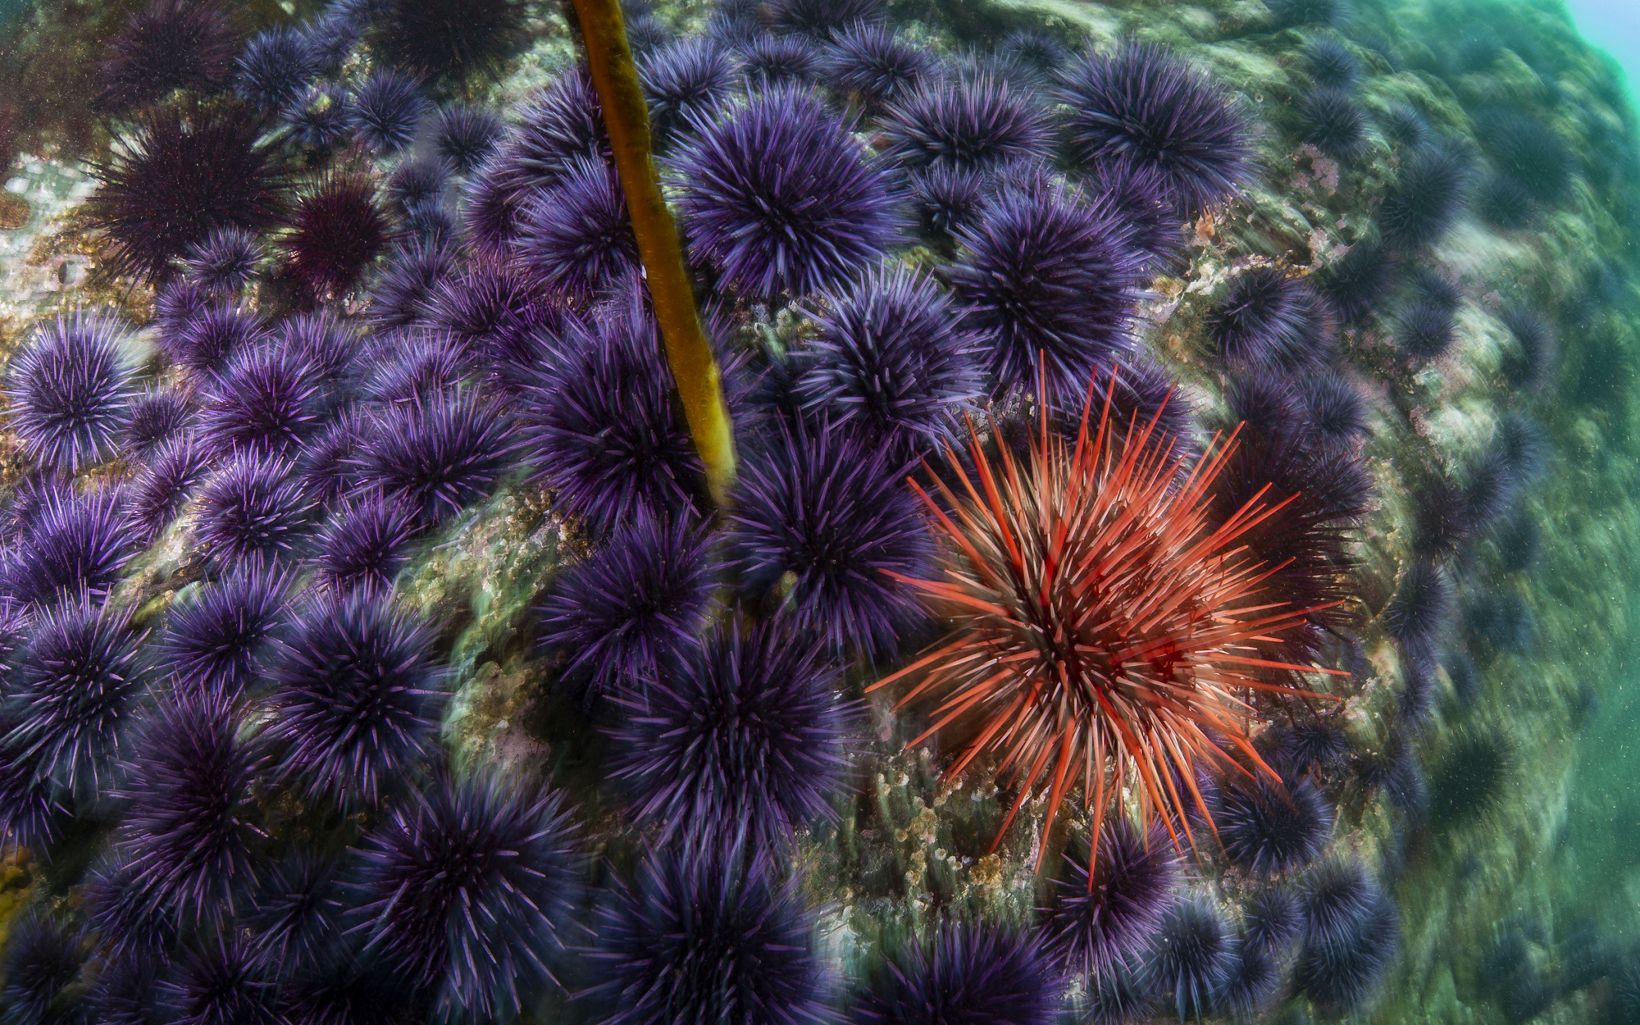 A red urchin is surrounded by purple sea urchins.